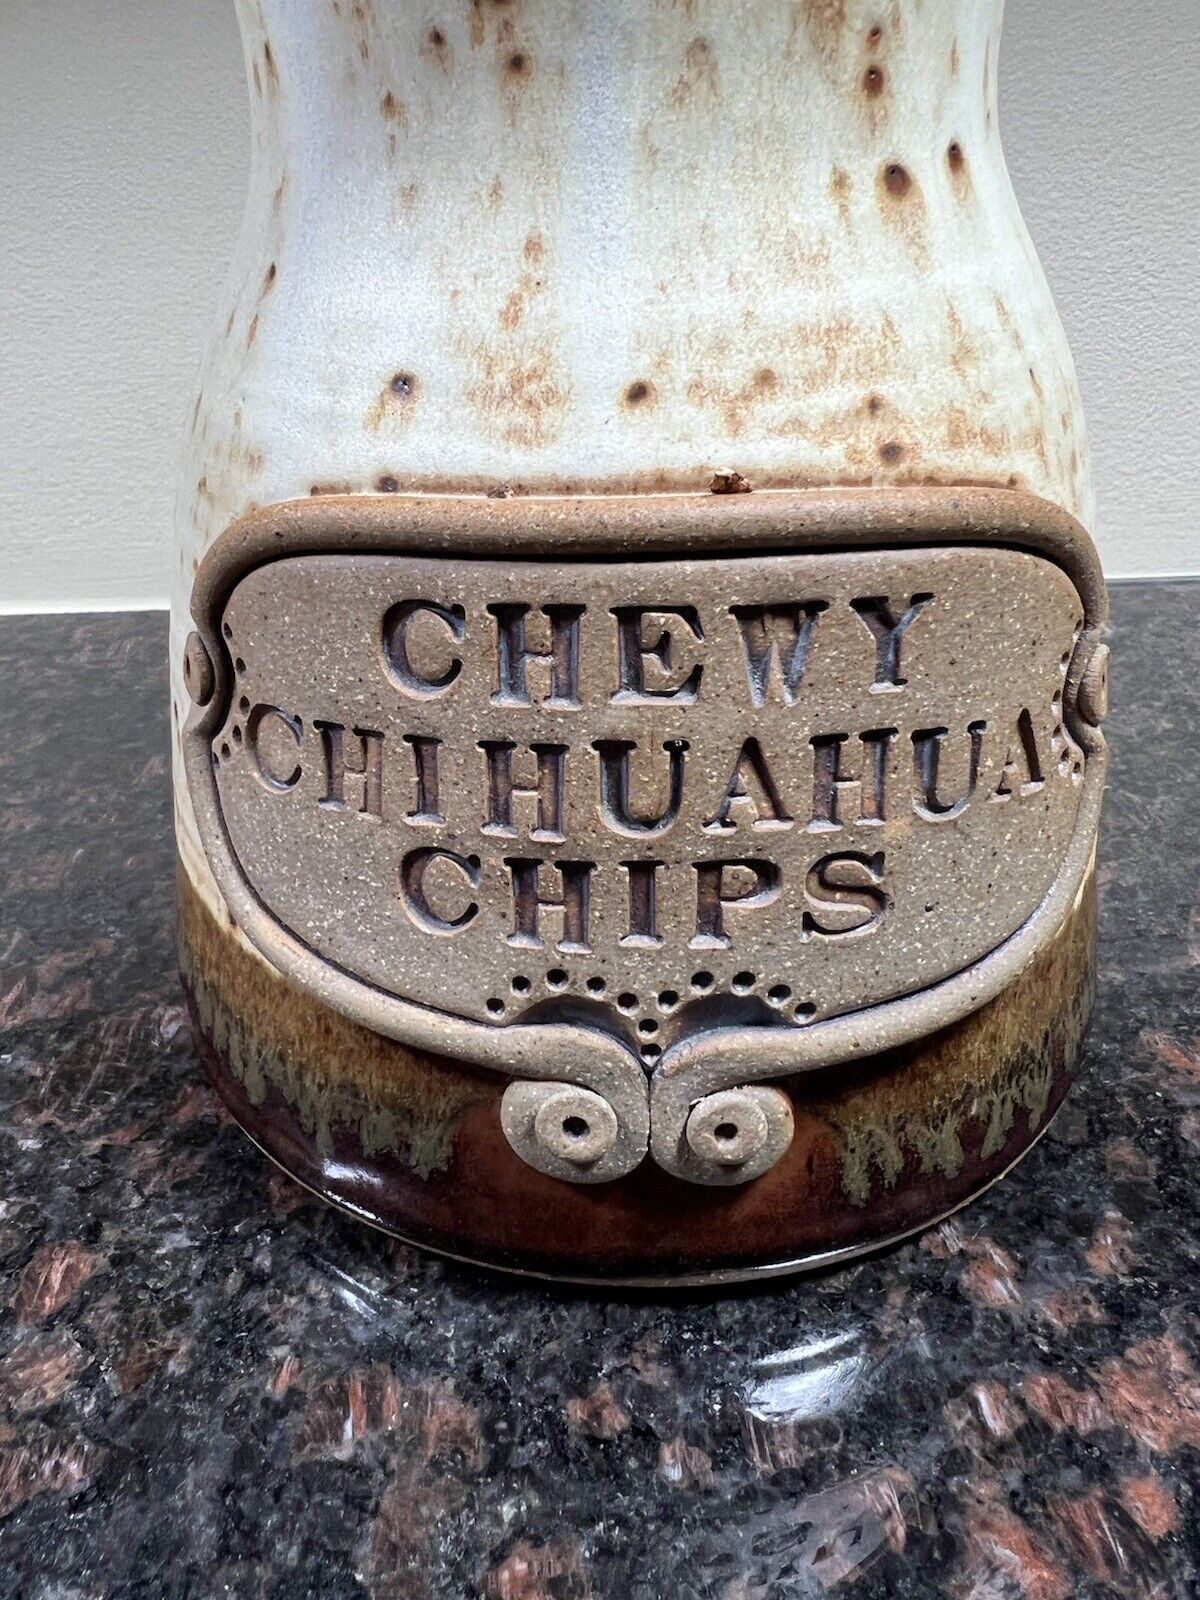 Chewy Chihuahua Chips Treat Canister